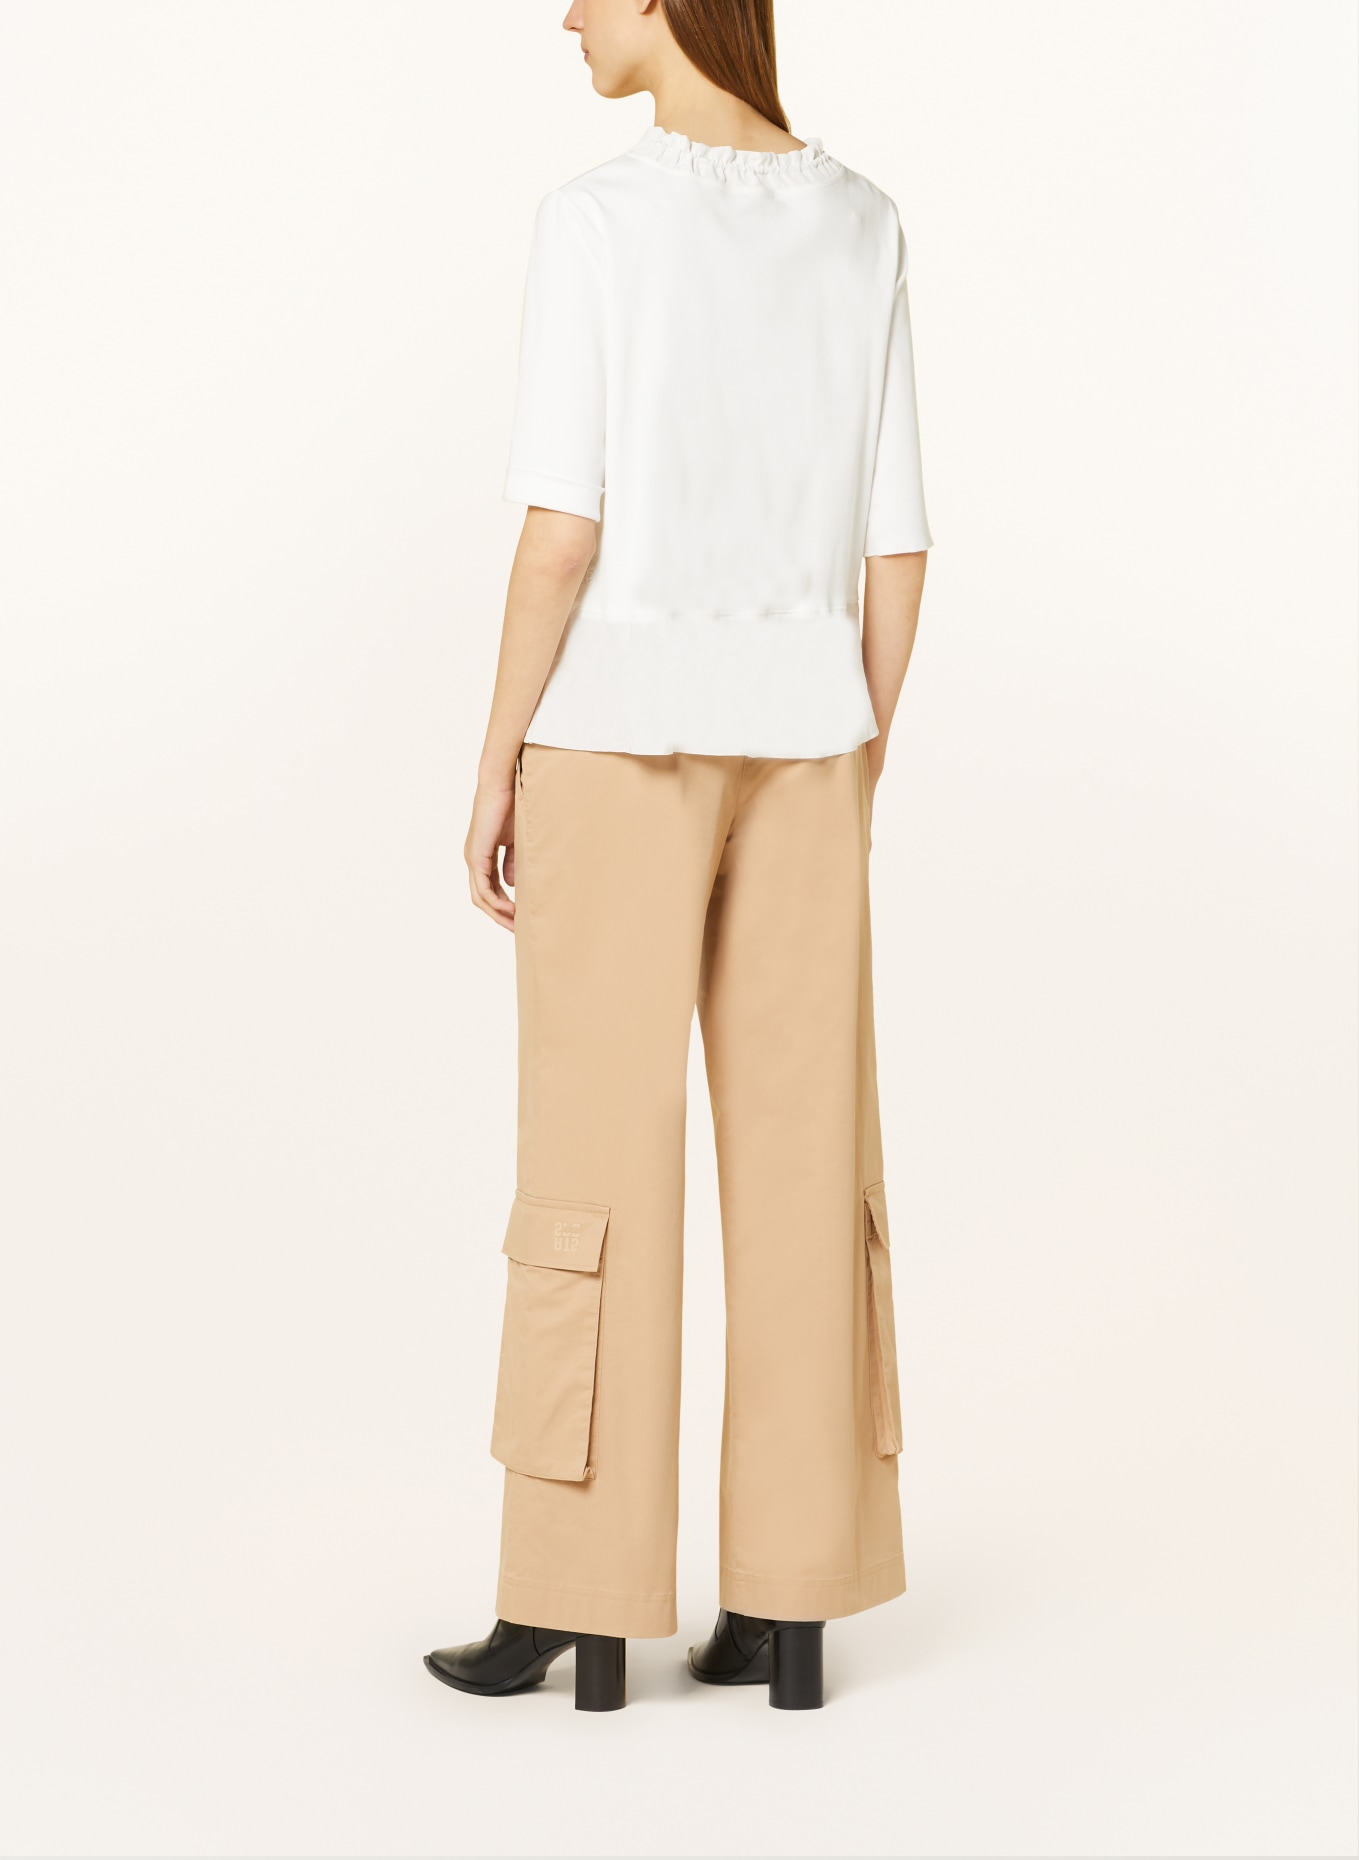 MARC CAIN Shirt blouse in mixed materials with 3/4 sleeves, Color: 110 off (Image 3)